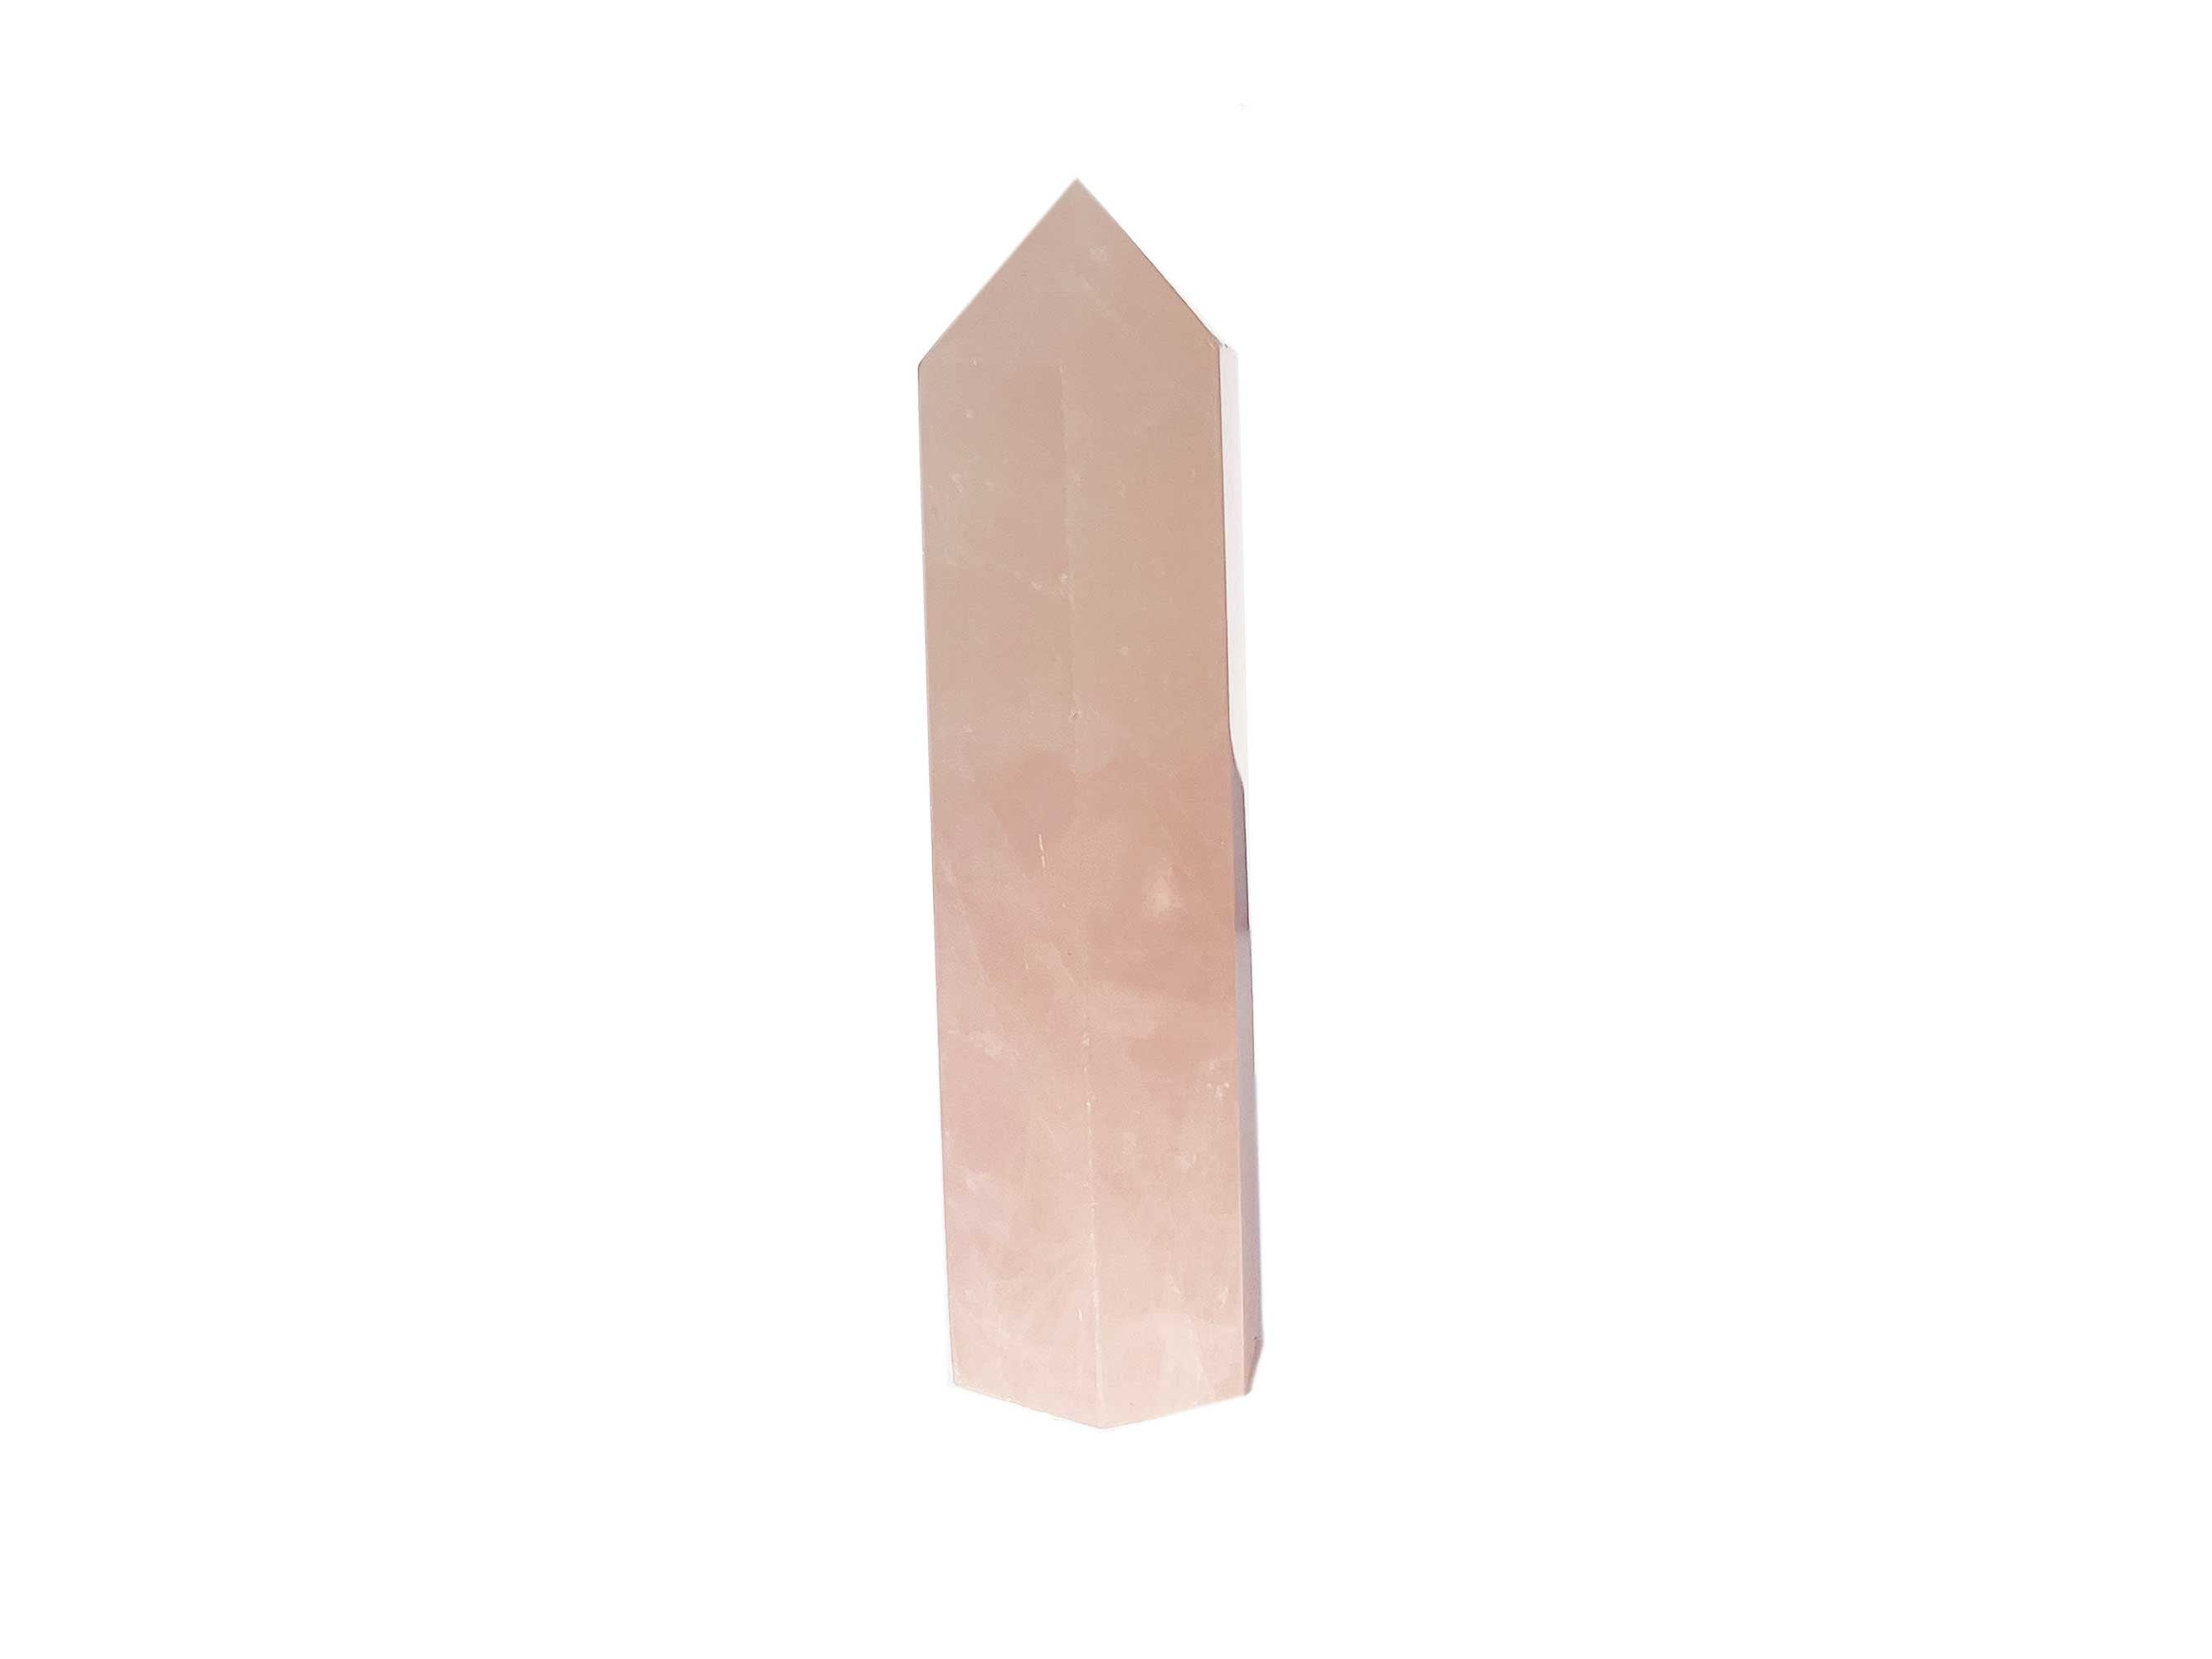 Buy Online Latest and Unique Rose Quartz Crystal Tower Point | Shop Best Spiritual Items - The Mystical Ritual